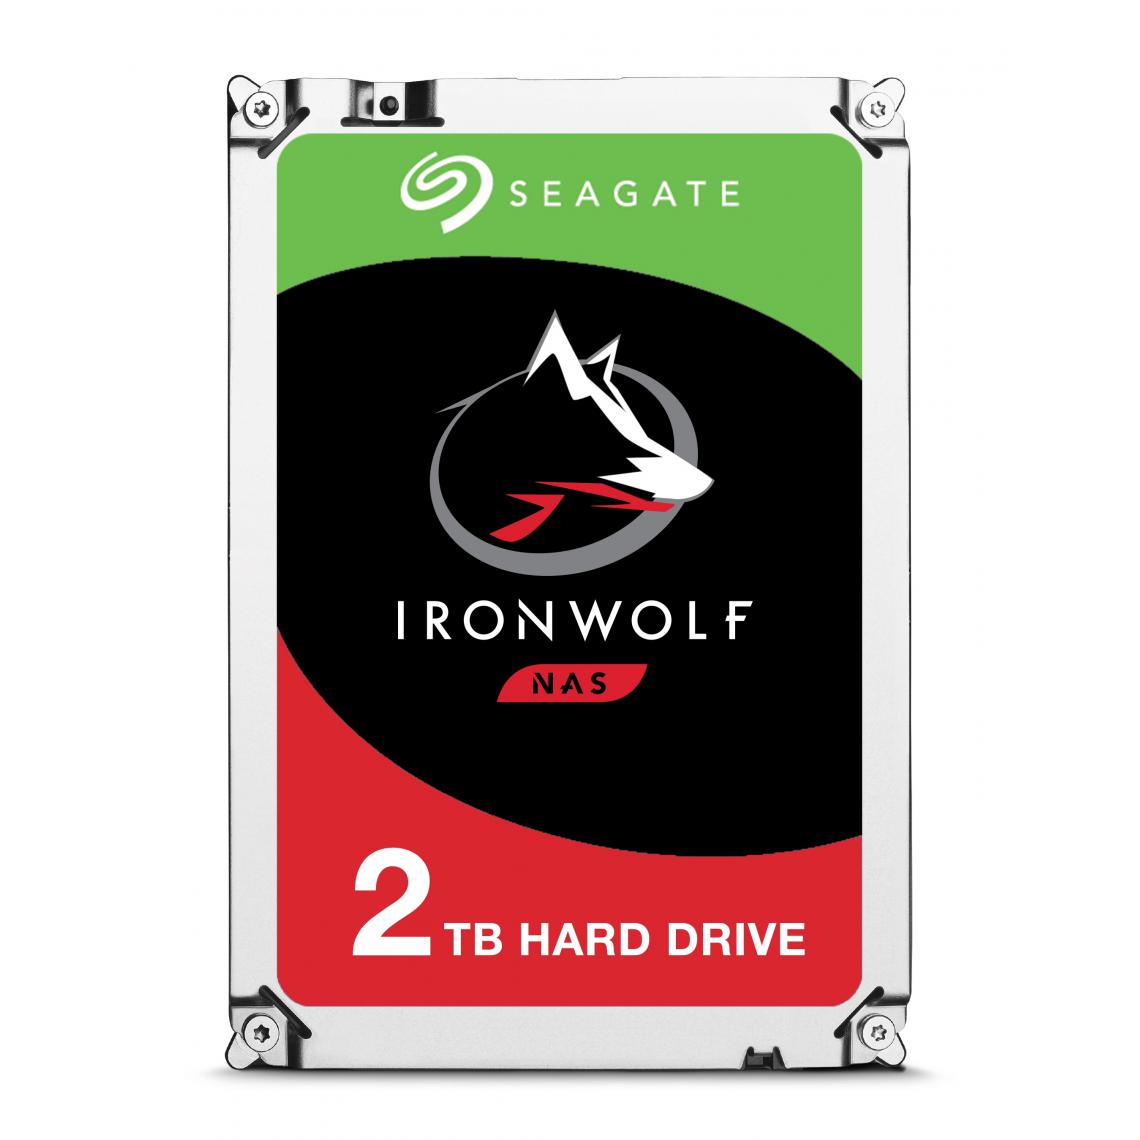 Seagate - NAS HDD 2To IronWolf single NAS HDD 2To IronWolf 5900rpm 6Gb/s SATA 64MB cache 3.5p 24x7 for NAS and RAID rackmount systemes BLK single pack - Disque Dur interne